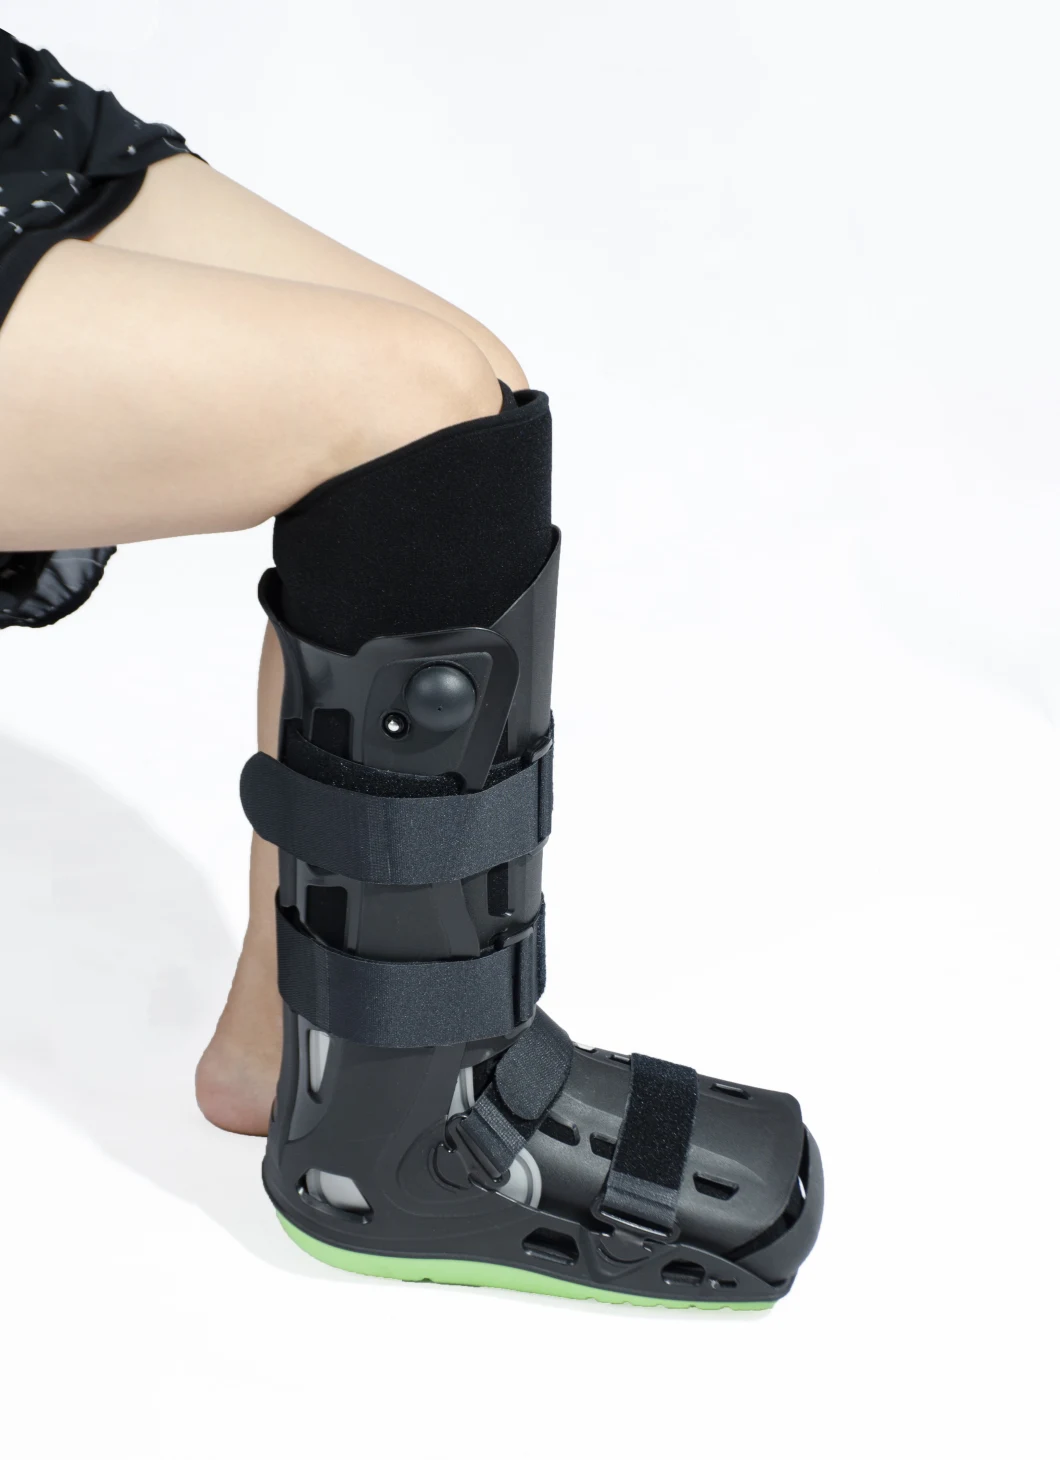 Best Selling Air Pouches and Hinghed Aircast Walker Brace/Medical Walker Boot